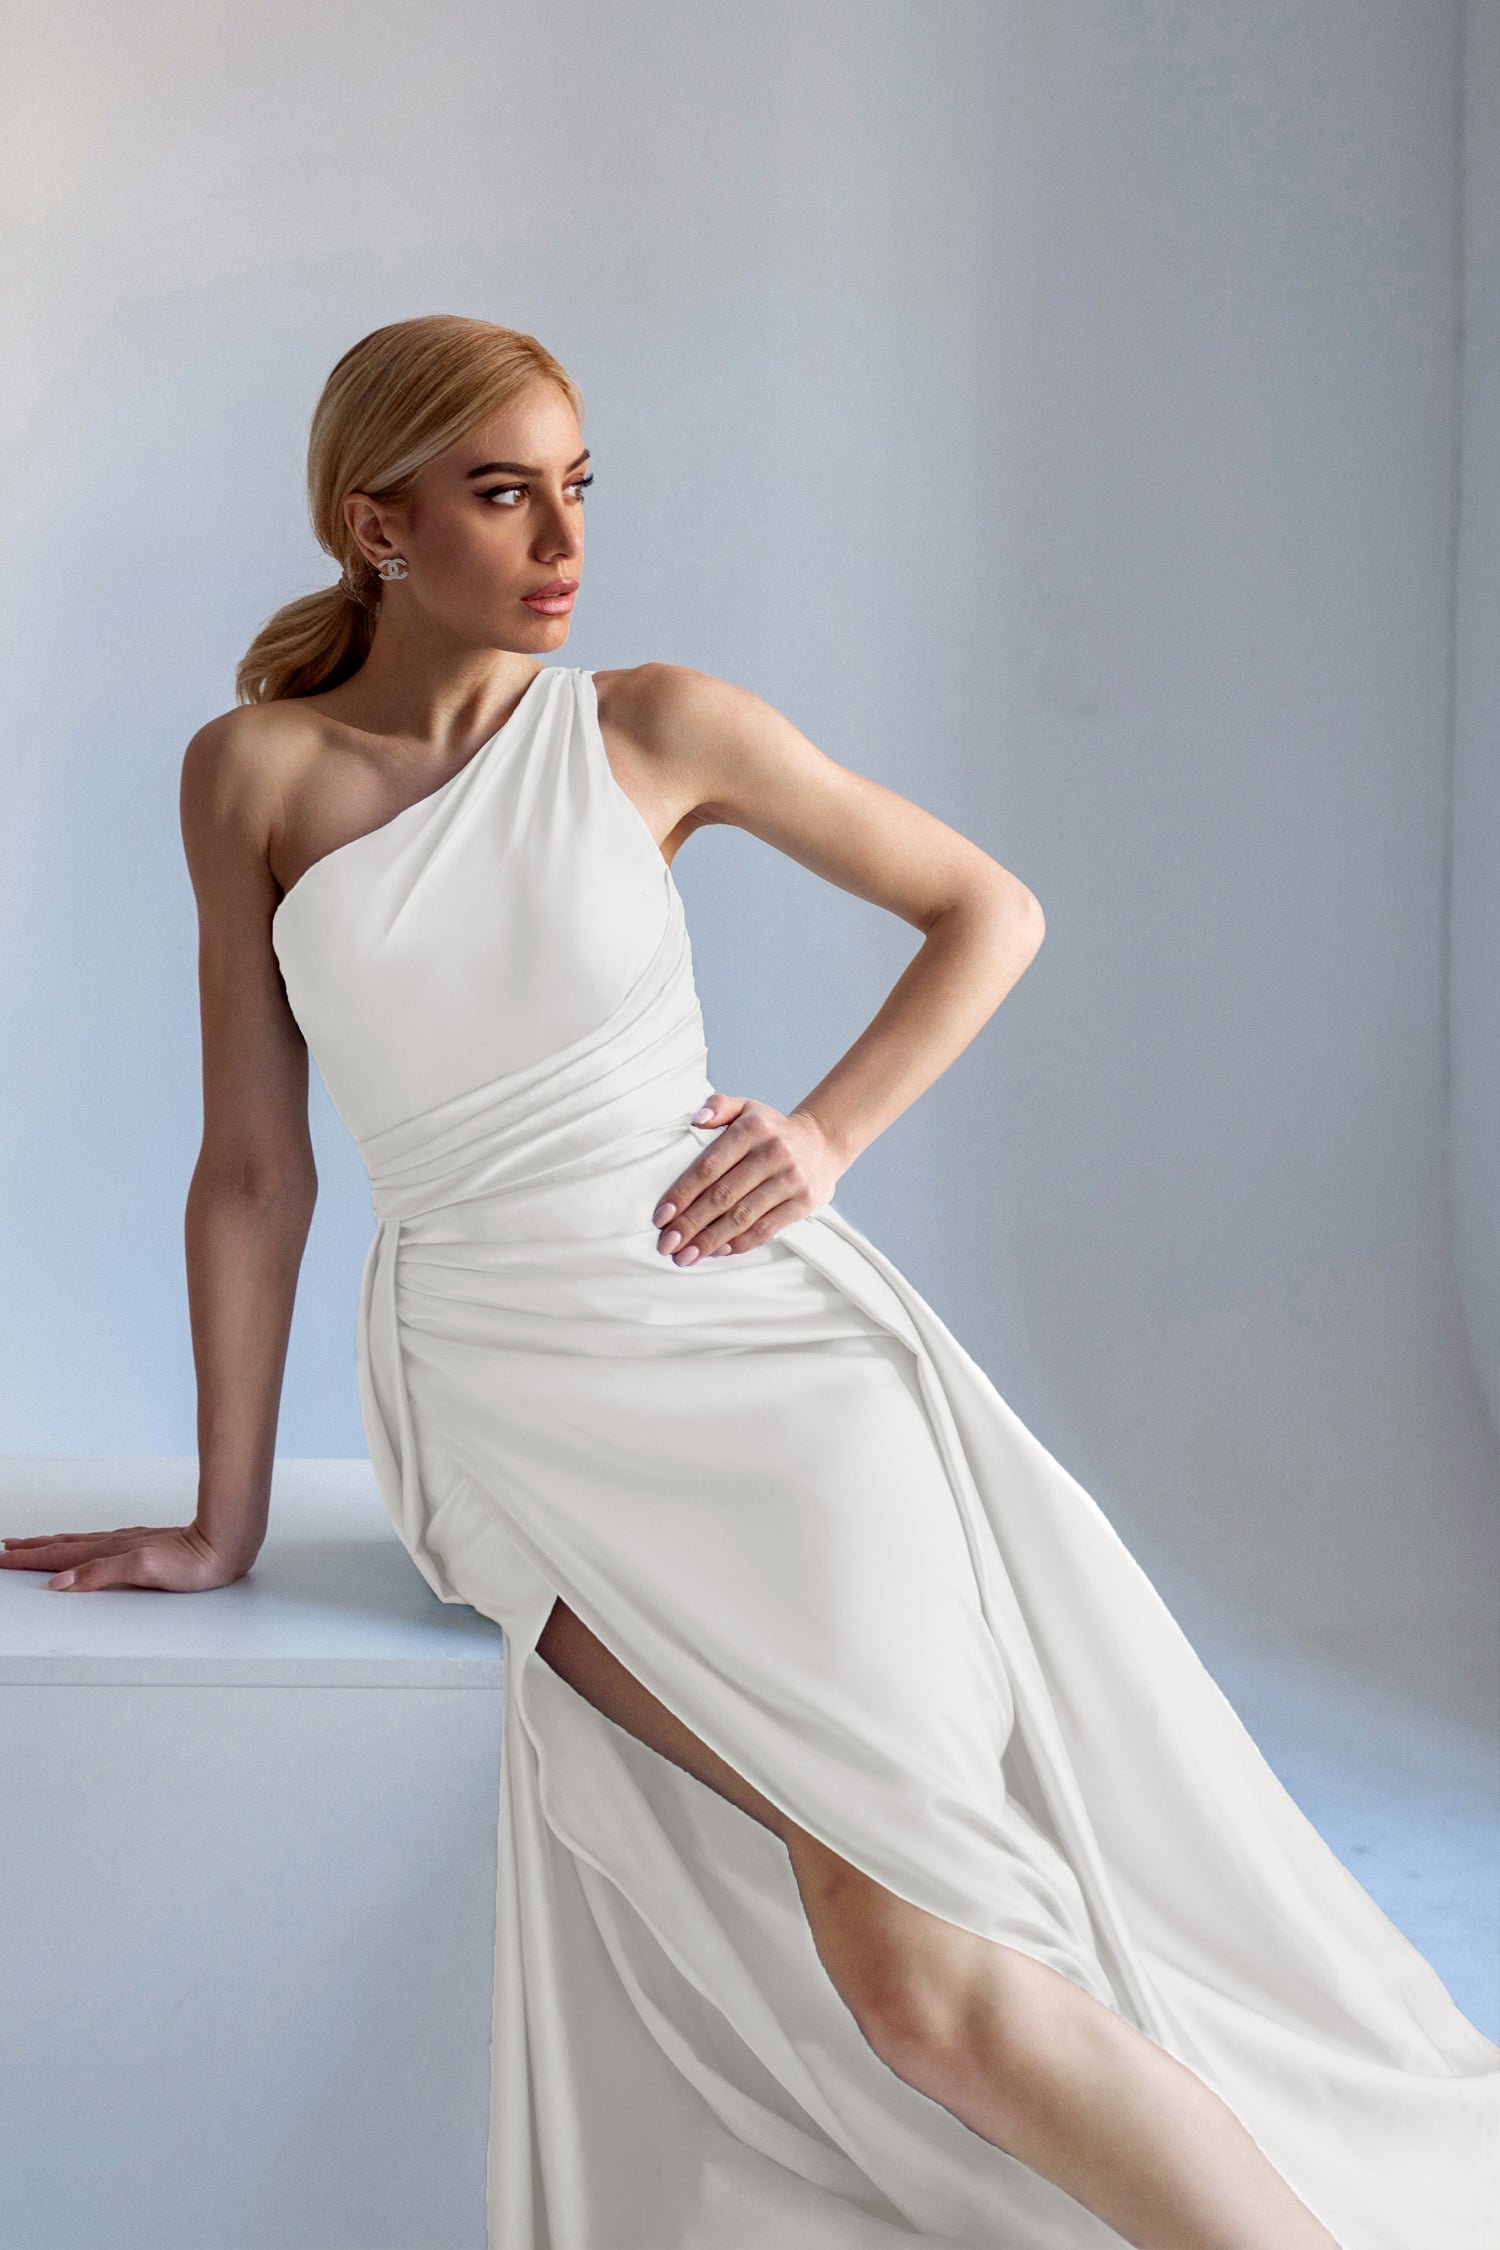 10 high-necked white dresses to buy this summer – White dresses with high  necks